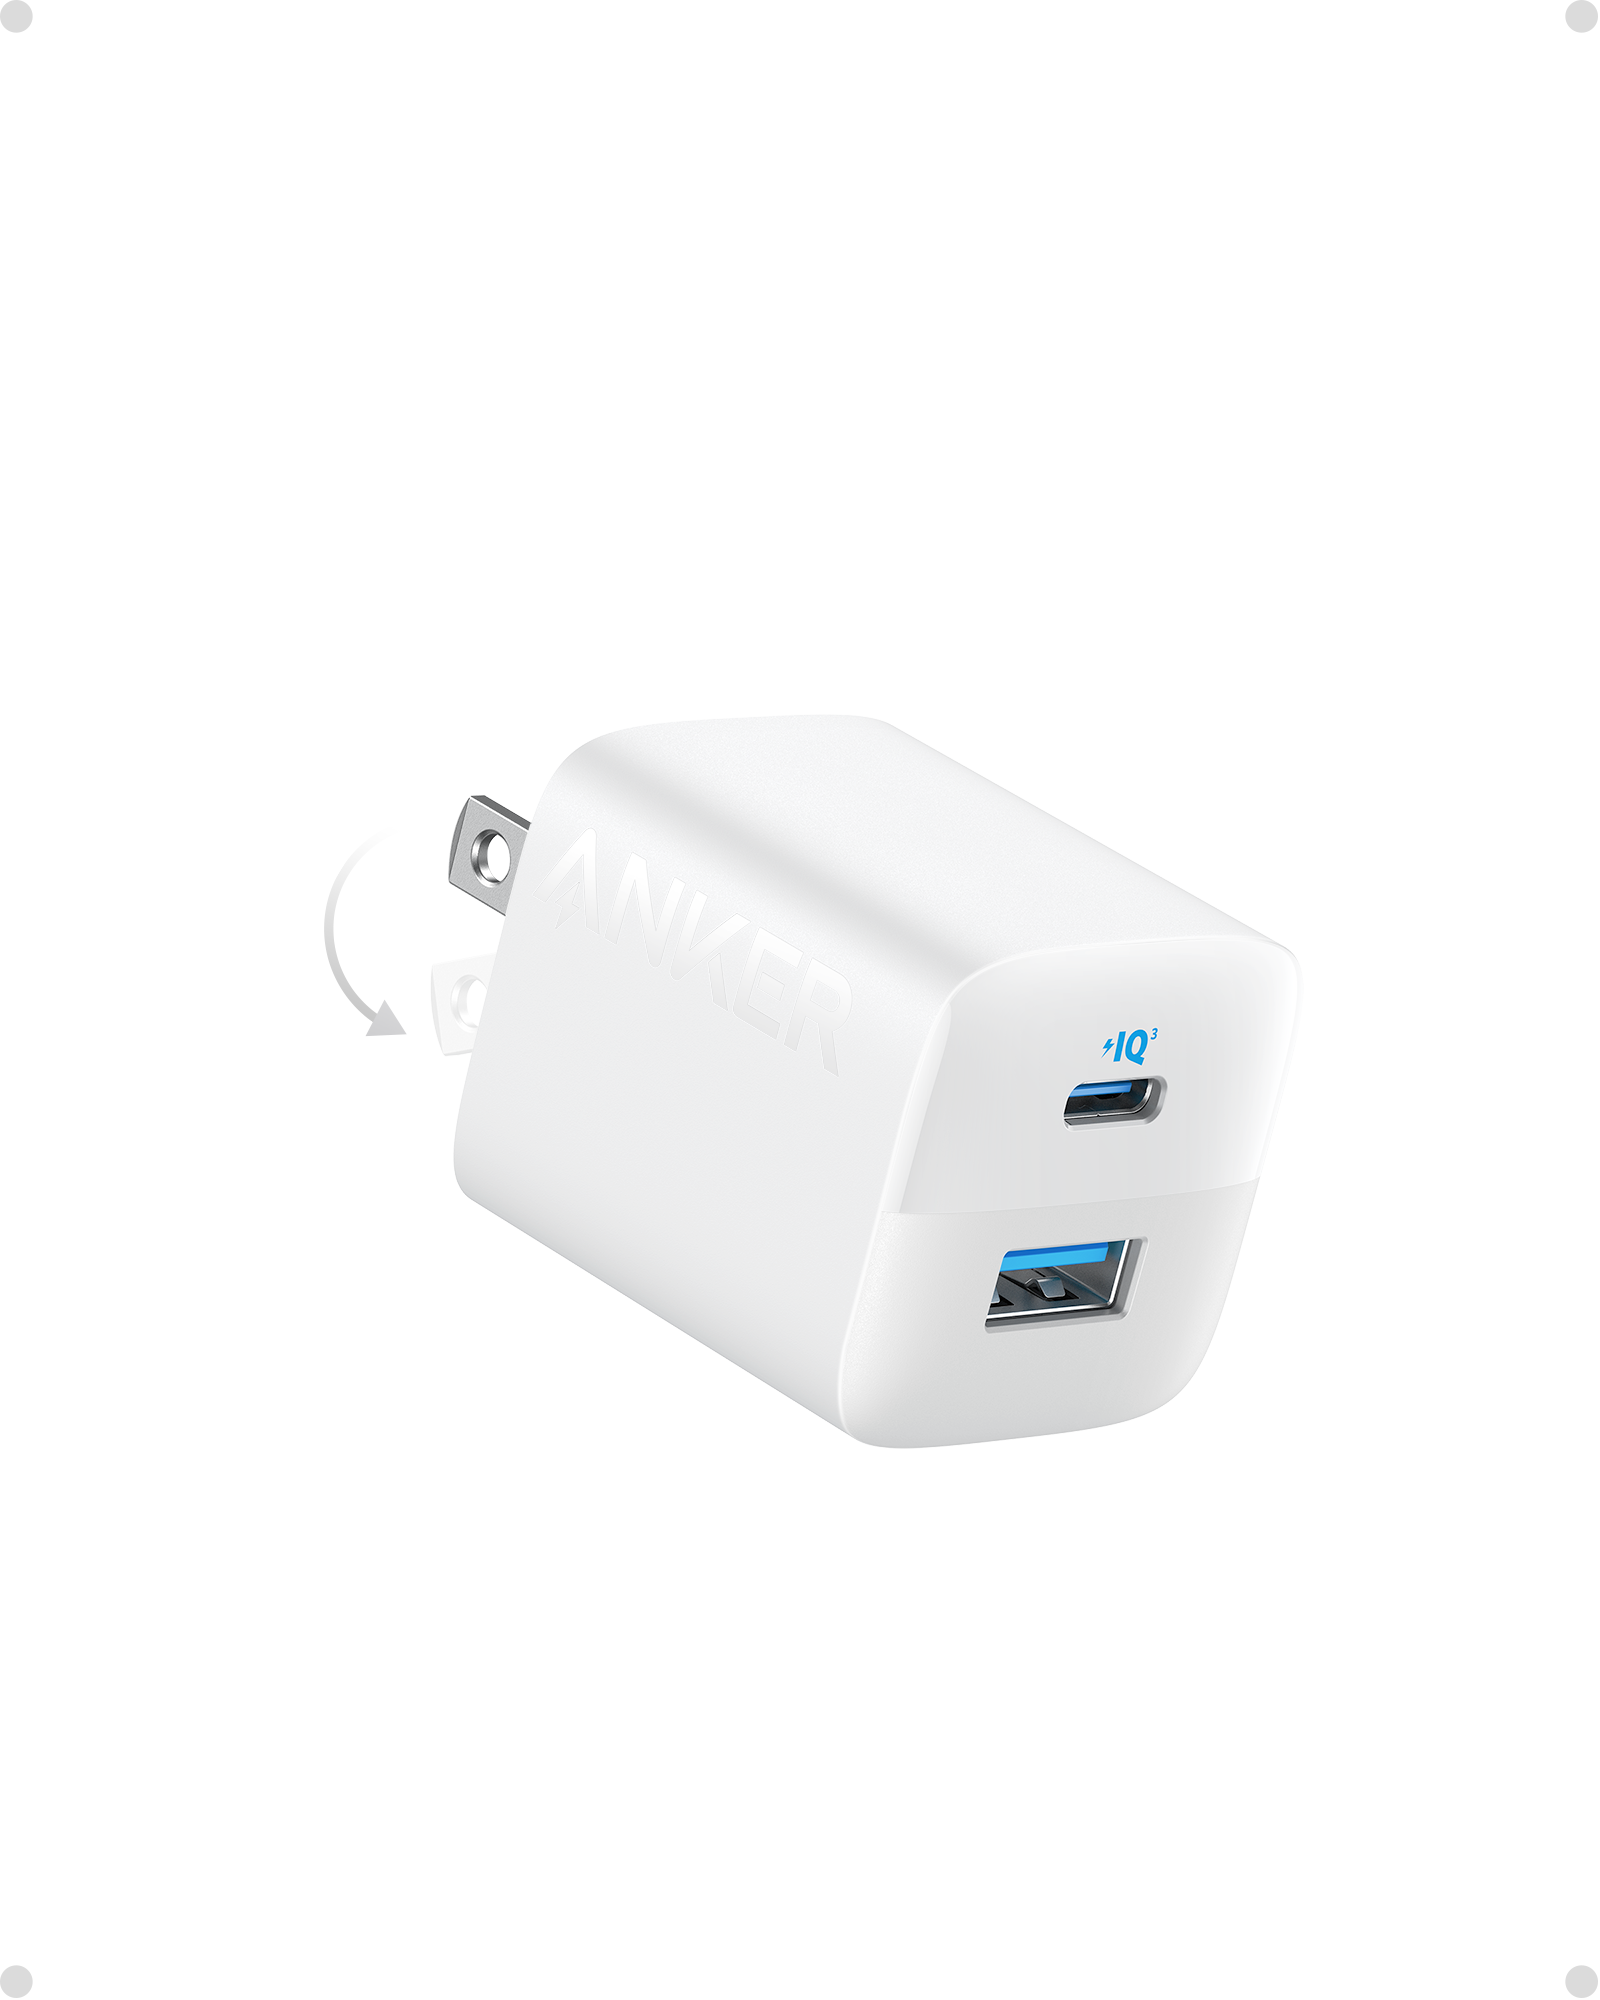 Snap Power Charger Review - USB Electrical Outlet 